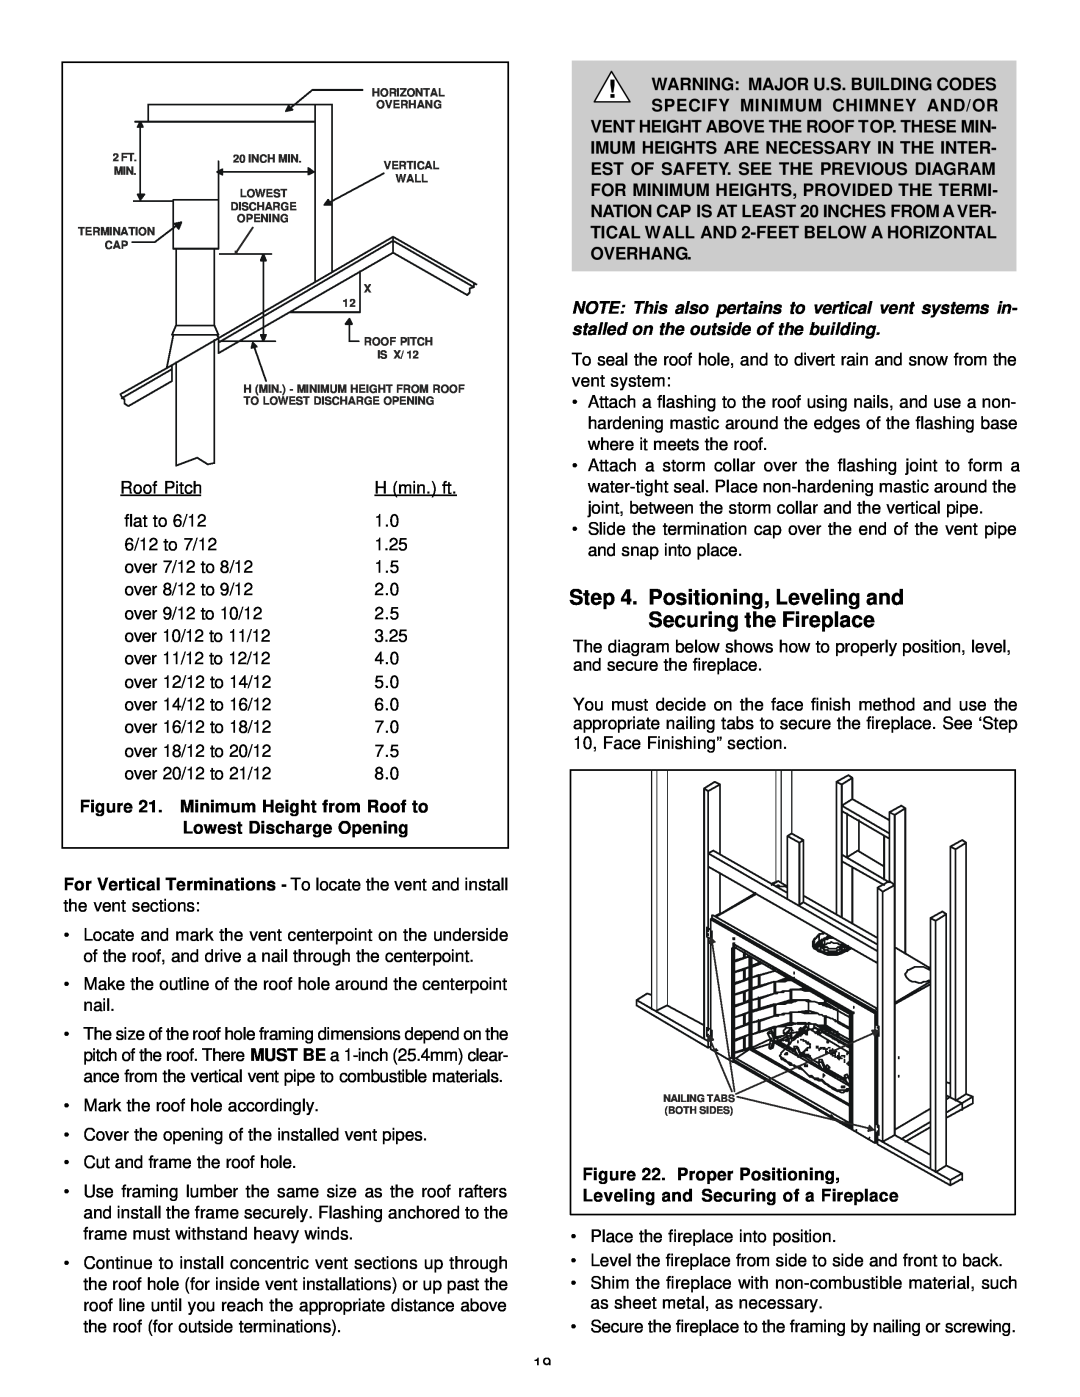 Heat & Glo LifeStyle 36DV manual Positioning, Leveling and, Securing the Fireplace, Proper Positioning 